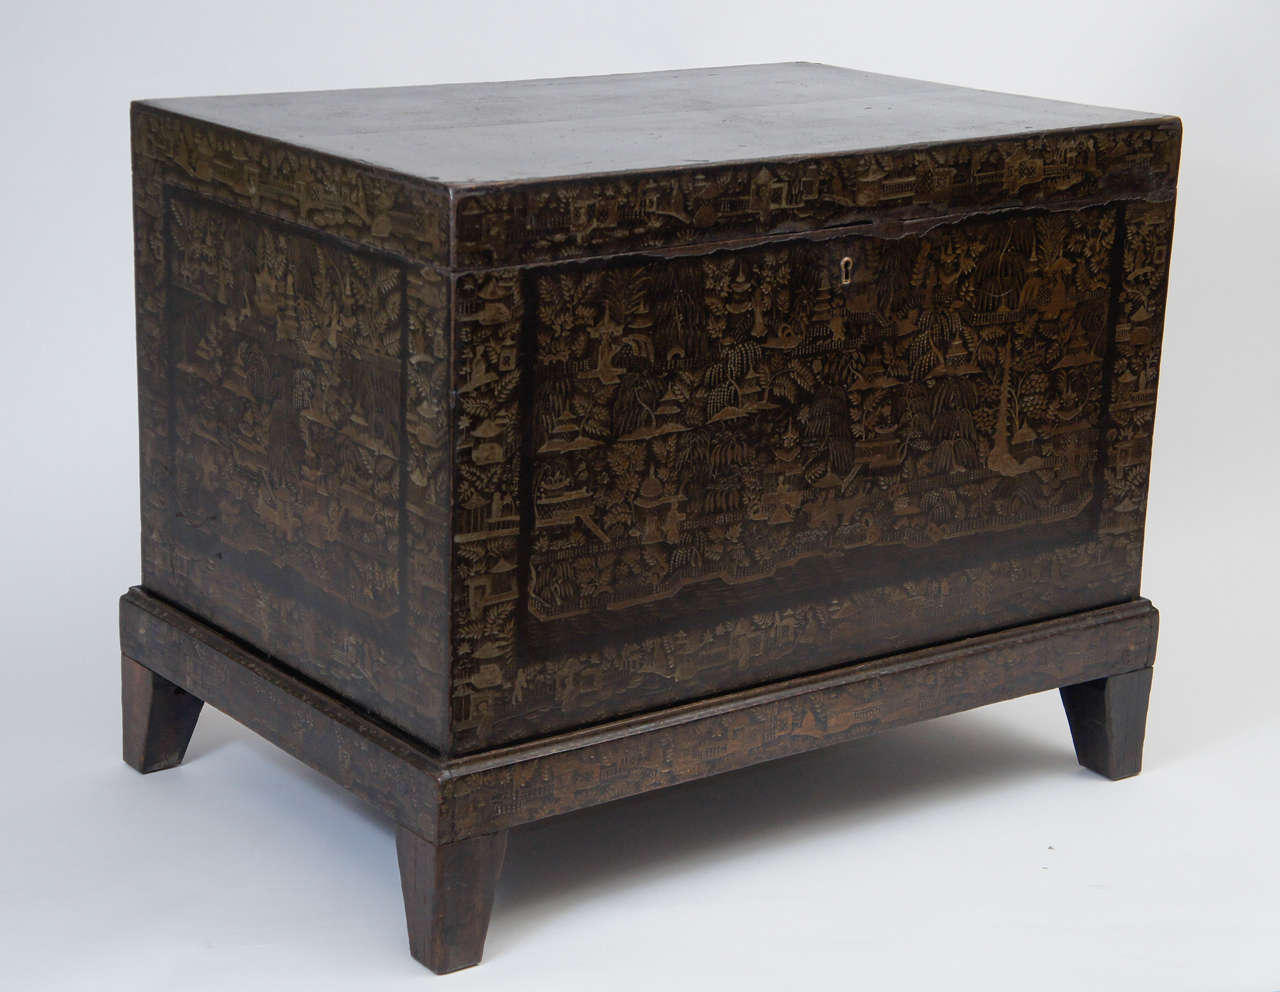 Wonderful c. 1820 Anglo-Indian lift-top chest on stand having original lacquer with all-over gilt Chinoiserie landscapes.  Interior retains original paint and pull out tray.